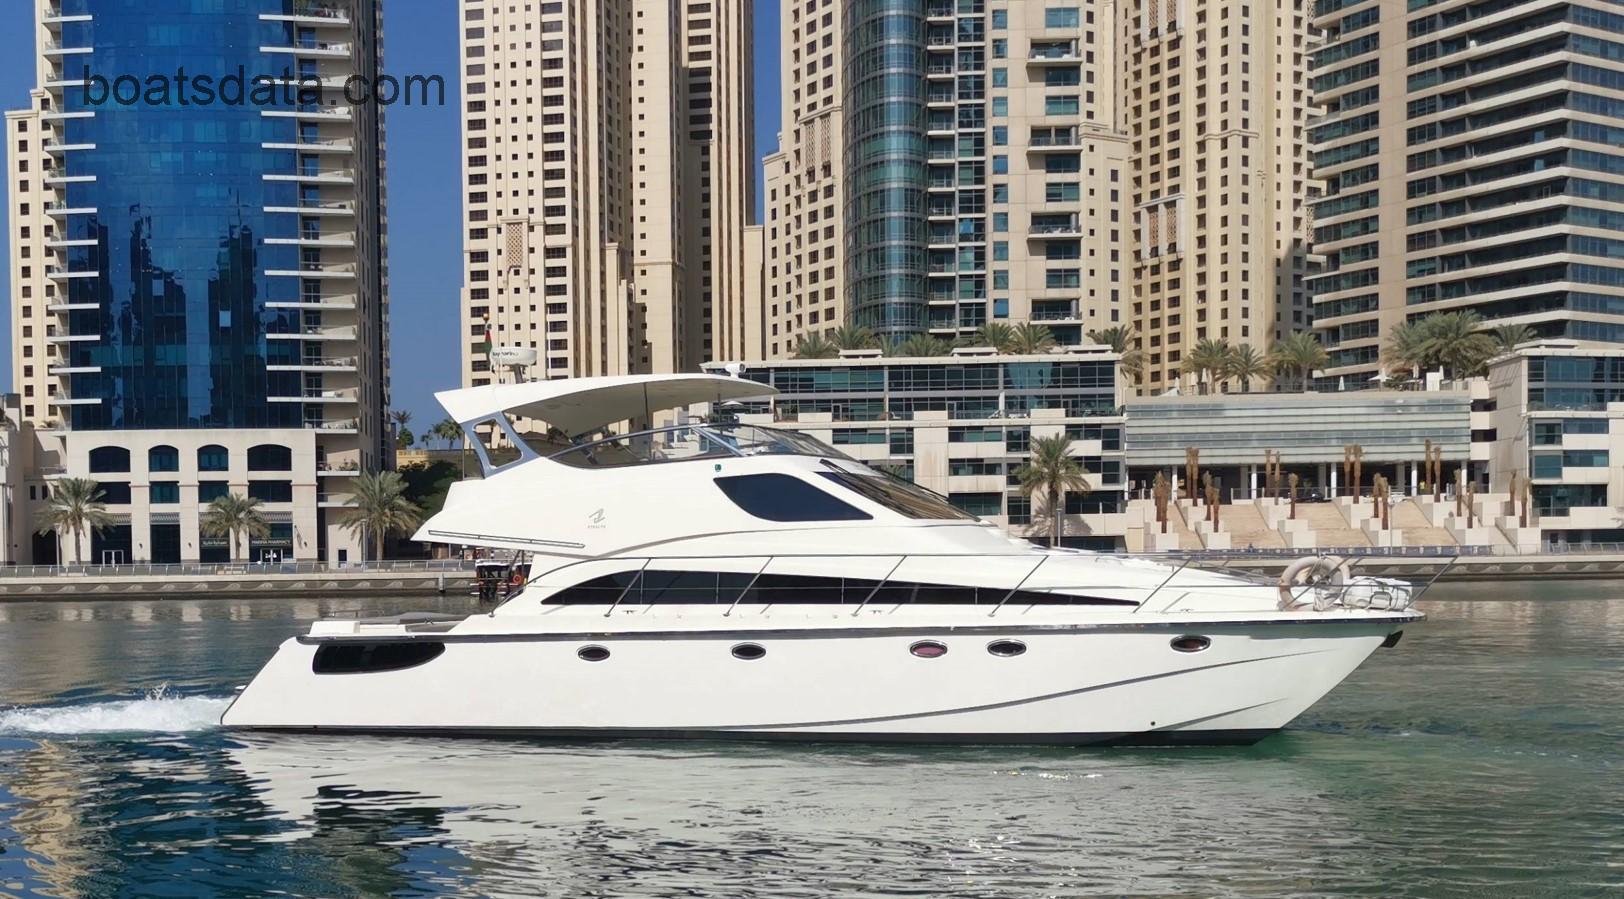 Stealth 540 Catamaran tv detailed specifications and features